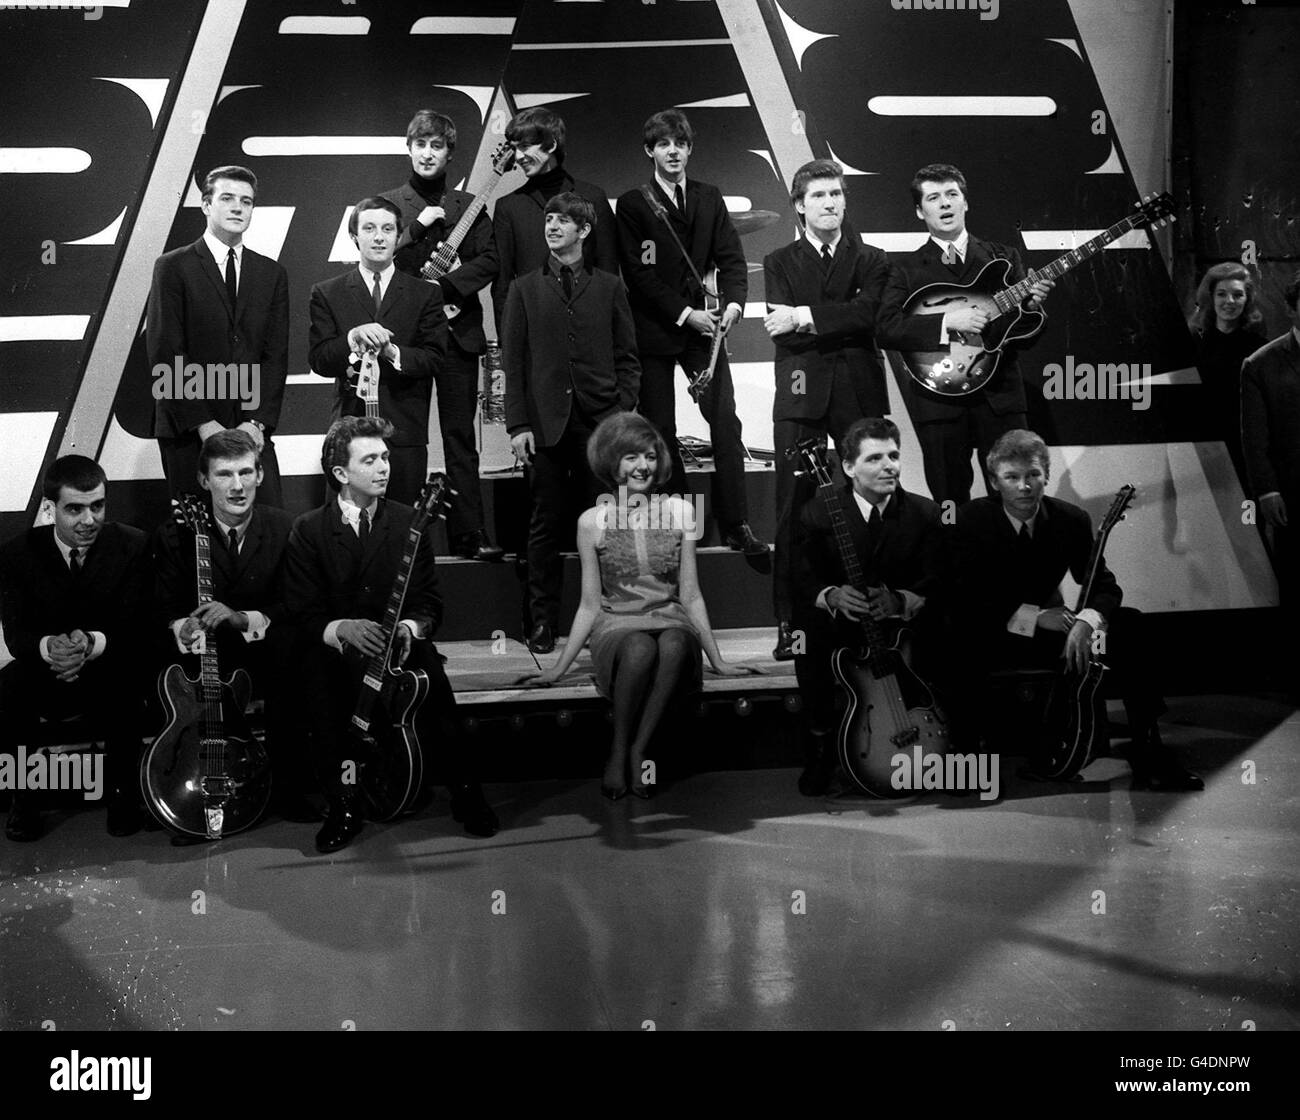 Rehearsals at Alpha studios, Birmingham, for ABC's 'Thank Your Lucky Stars' programme with Brian Matthew, Cilla Black (centre), The Beatles (back), Billy J. Kramer and the Dakotas, Gerry and the Pacemakers and The Searchers. Stock Photo